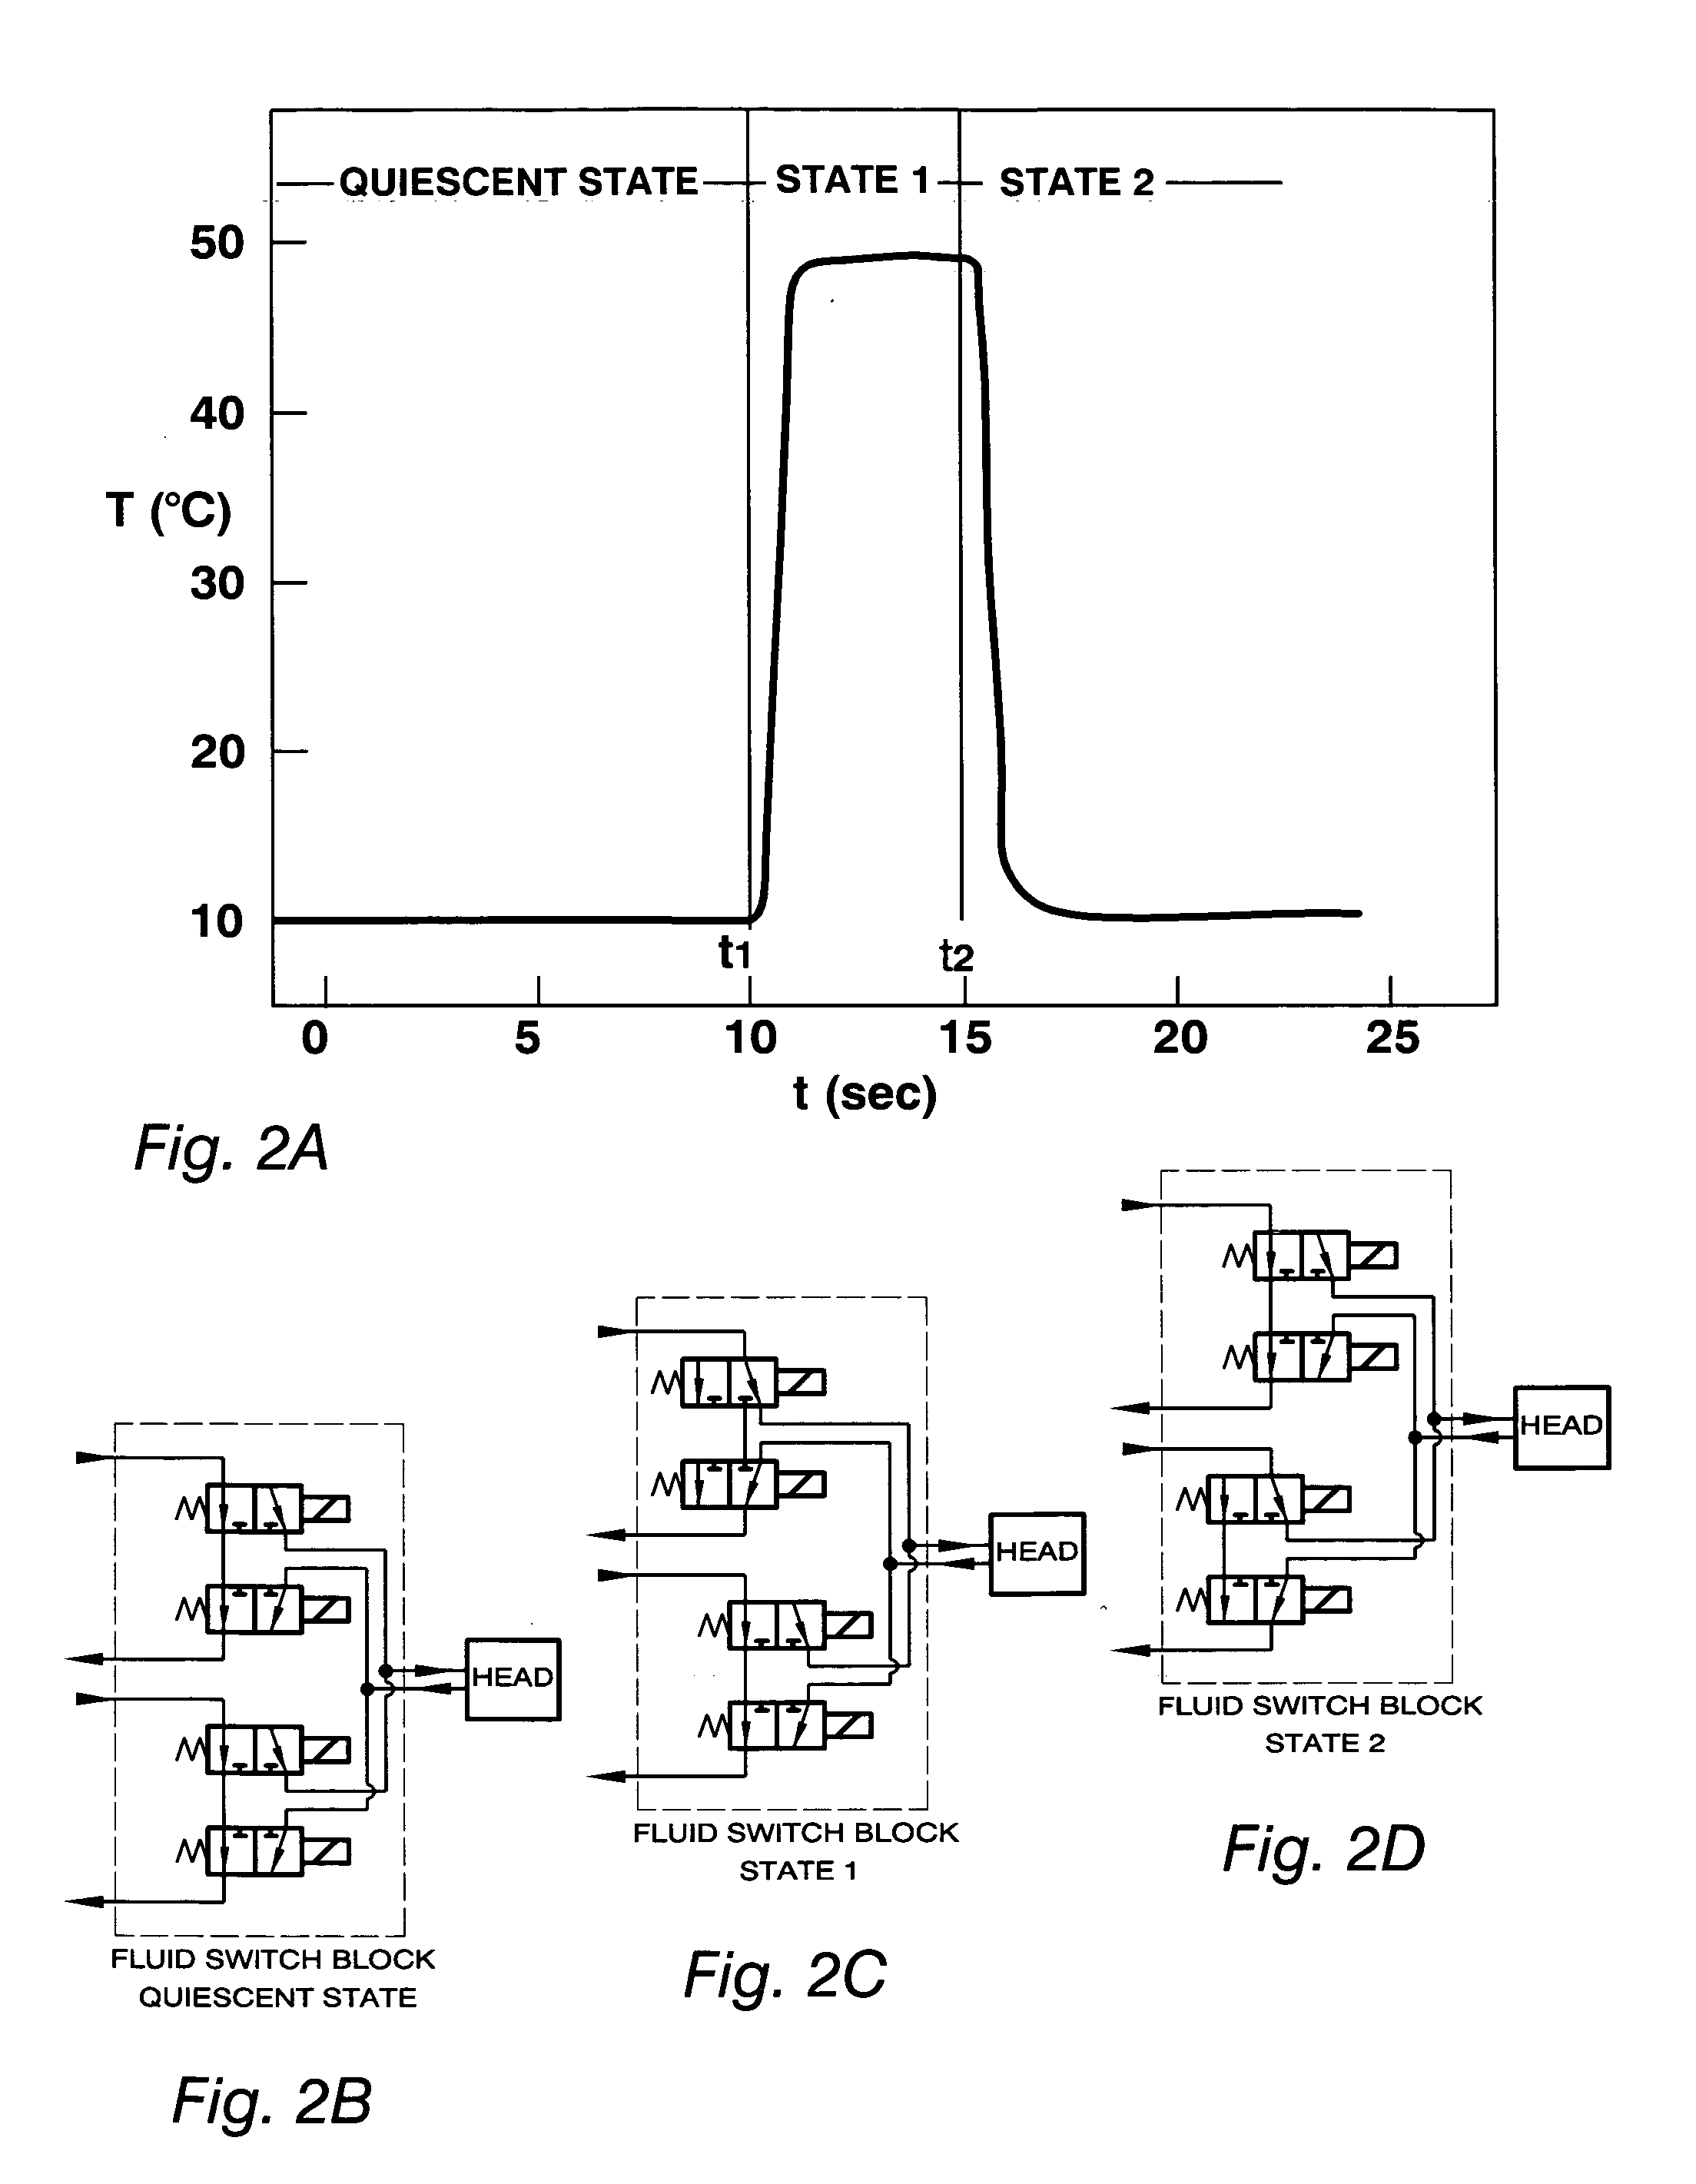 Method and apparatus for setting and controlling temperature